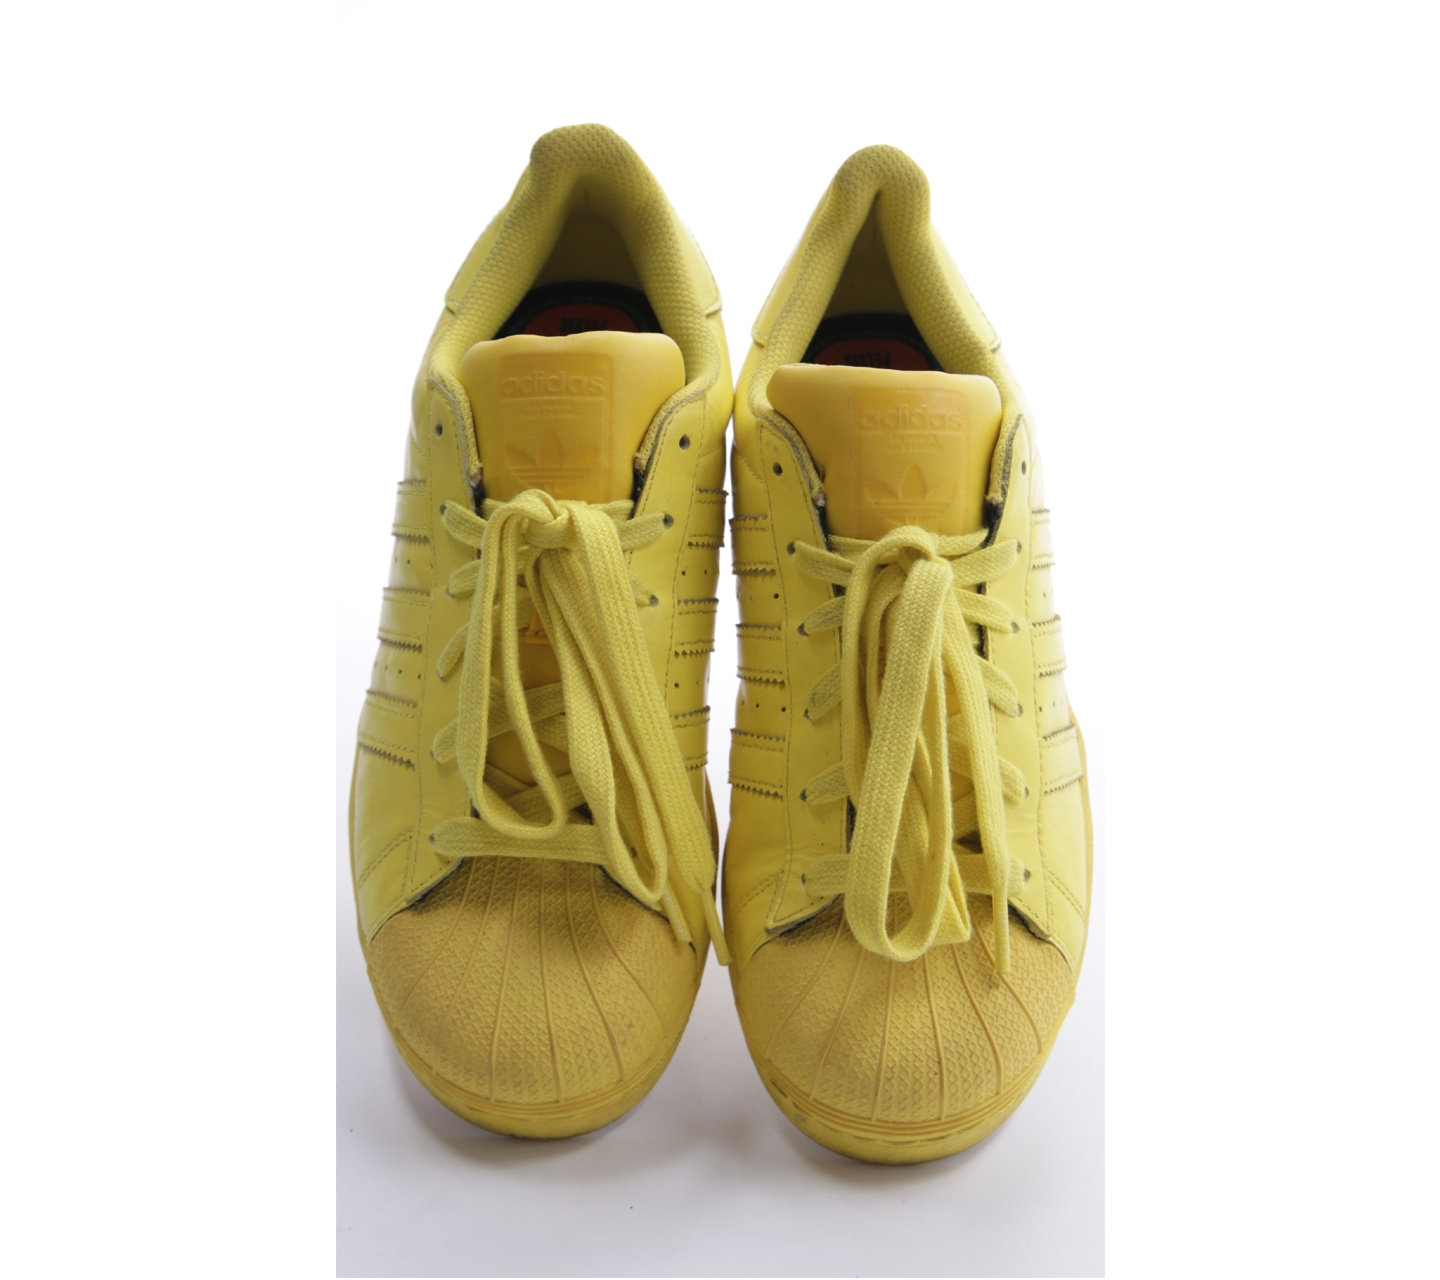 Adidas Yellow Sneakers